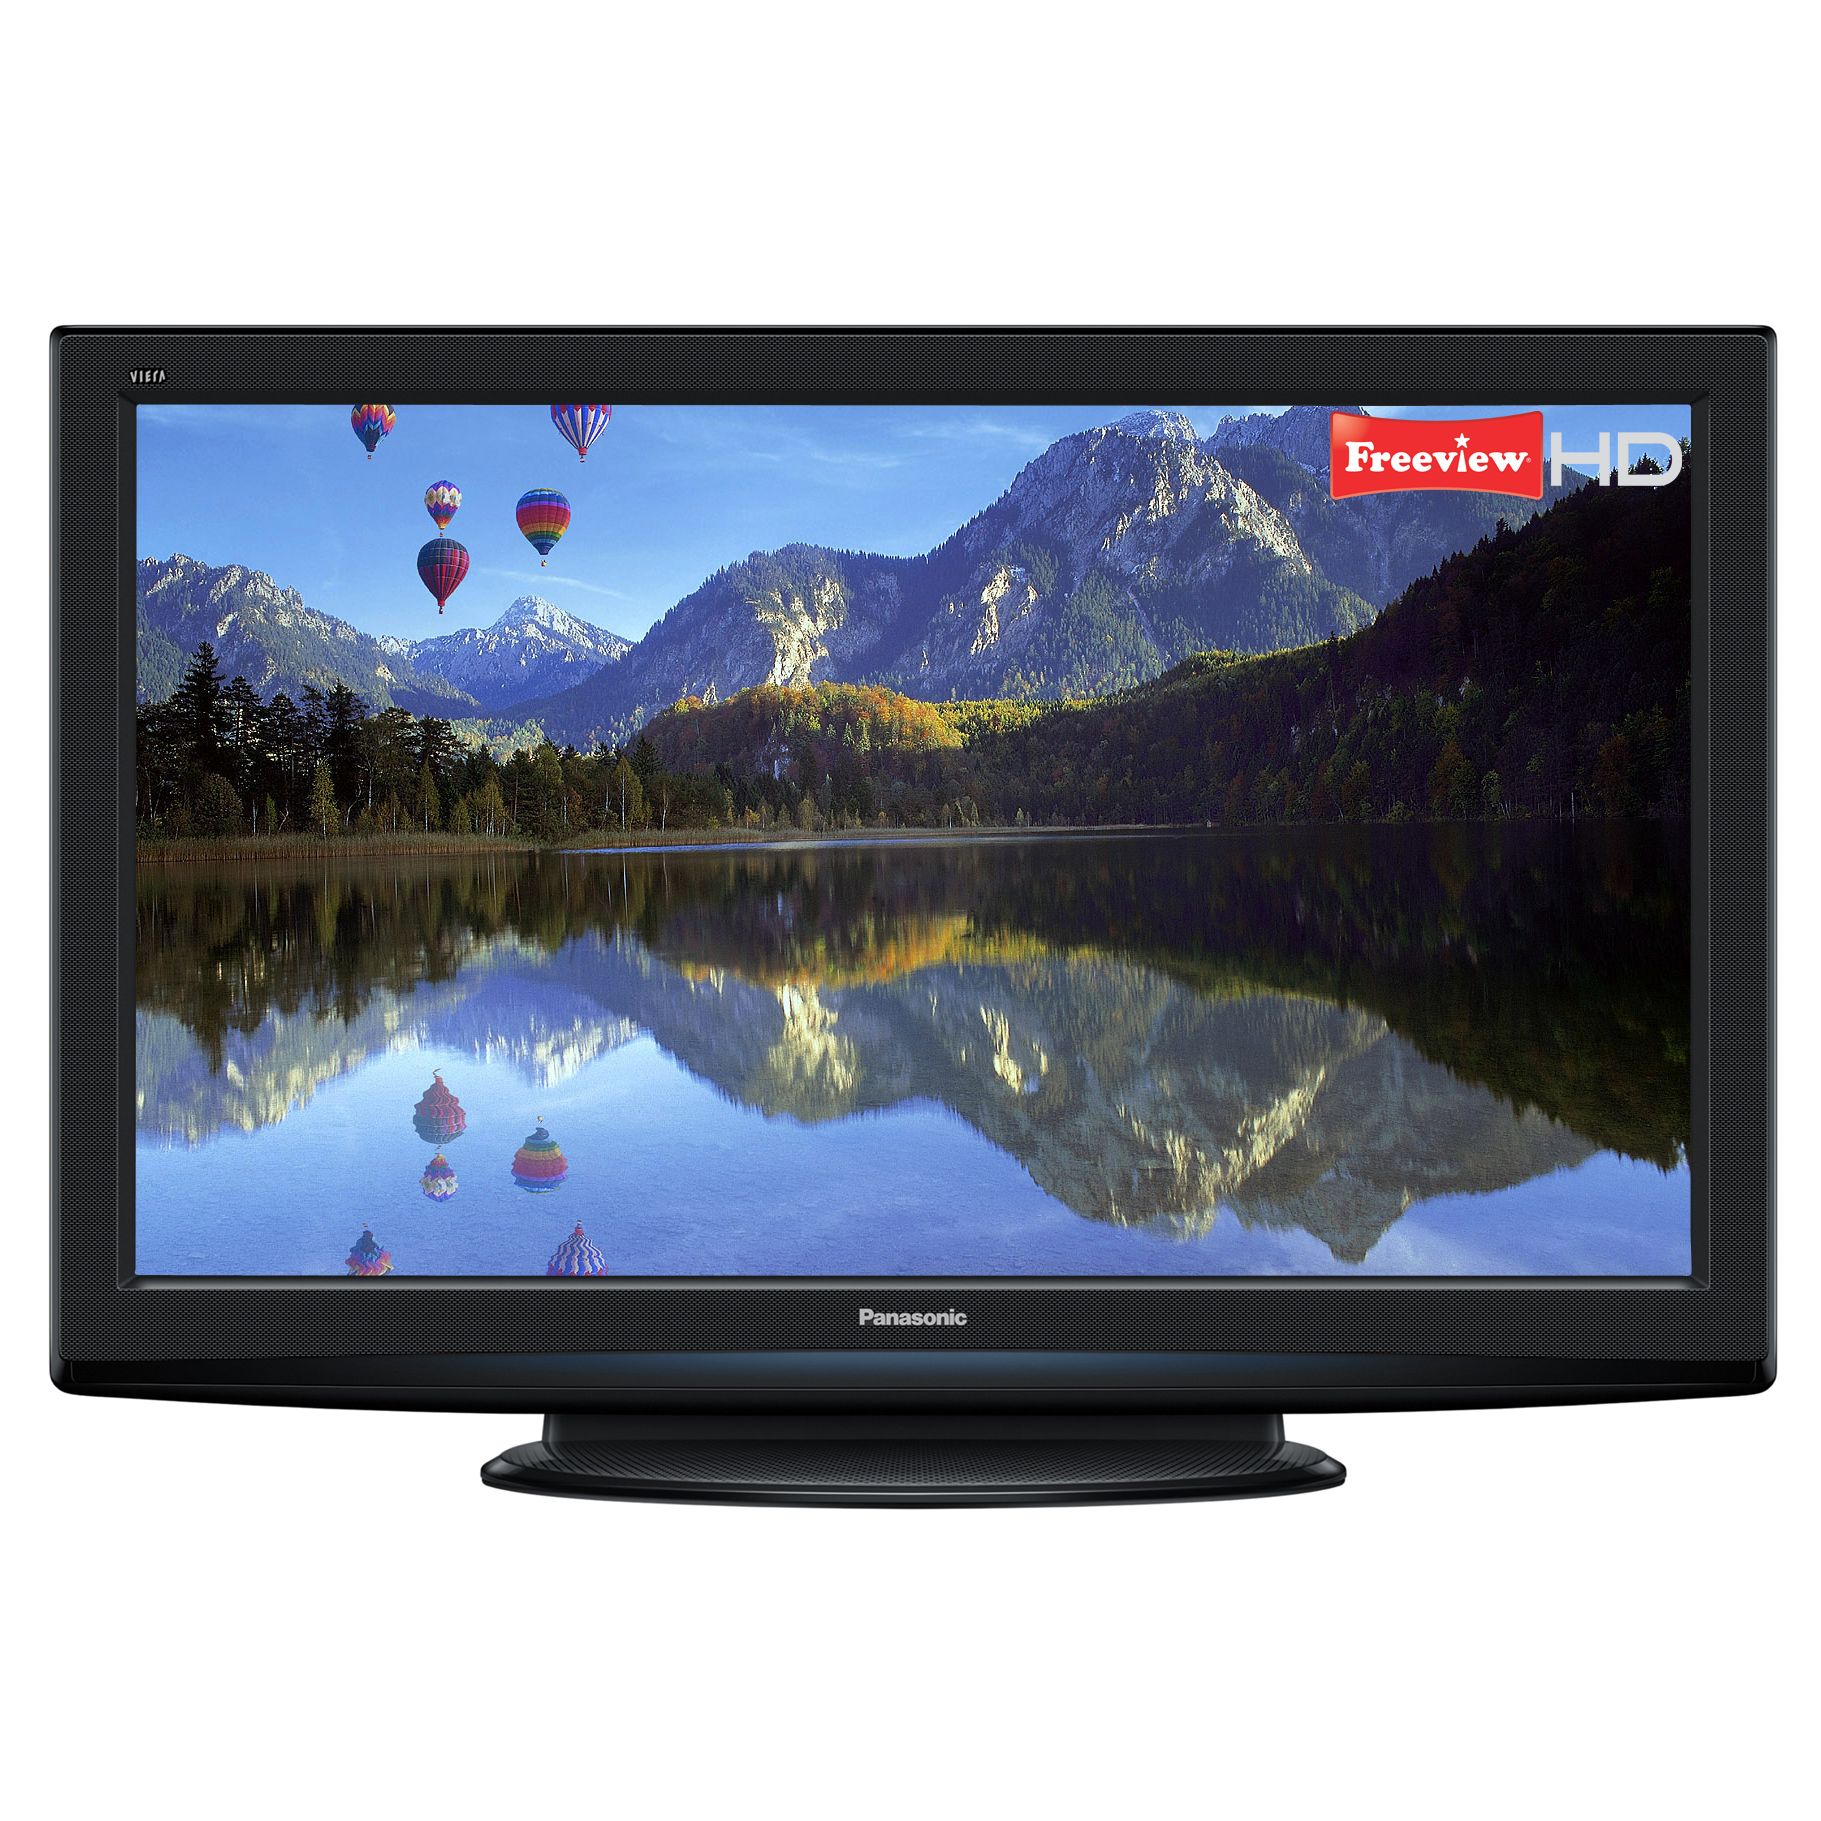 Panasonic Viera TX-P46S20B Plasma HD 1080p Digital Television, 46 Inch with Built-in Freeview HD at John Lewis